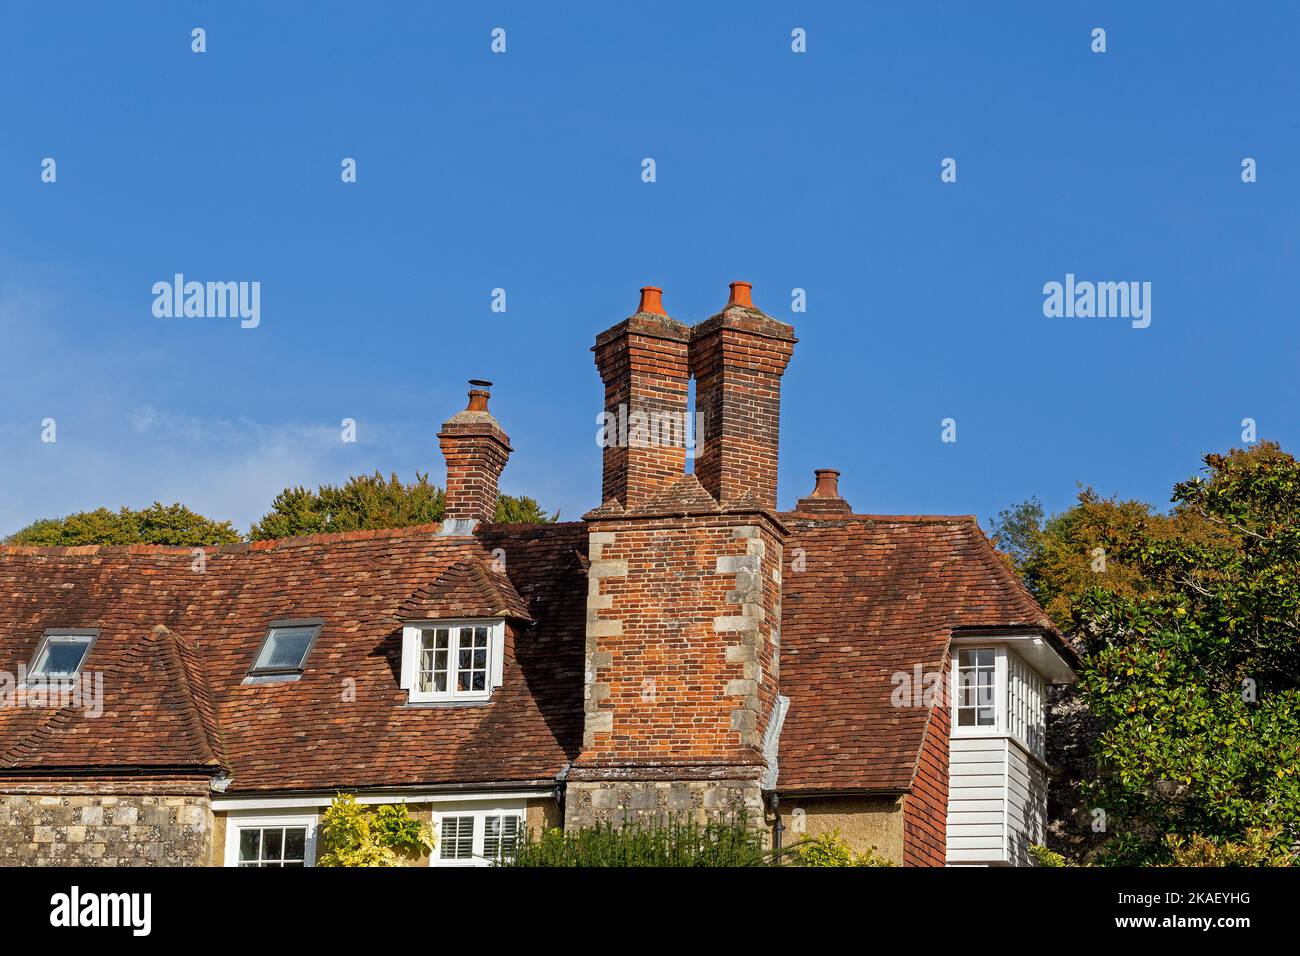 Roof and chimneys, Winchester, Hampshire, England, Great Britain Stock Photo